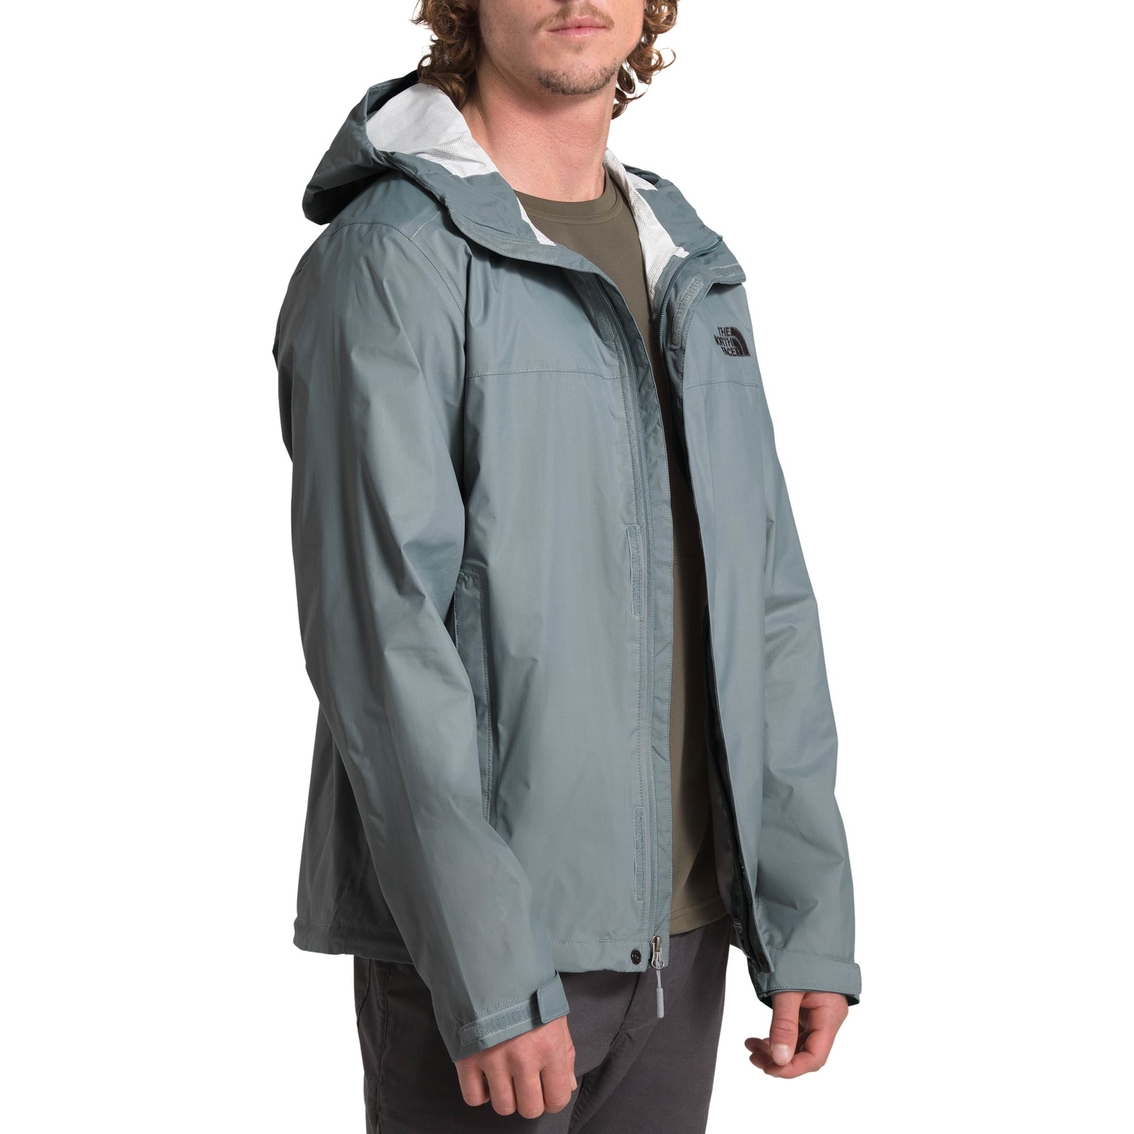 The North Face Venture 2 Jacket - Image 2 of 3